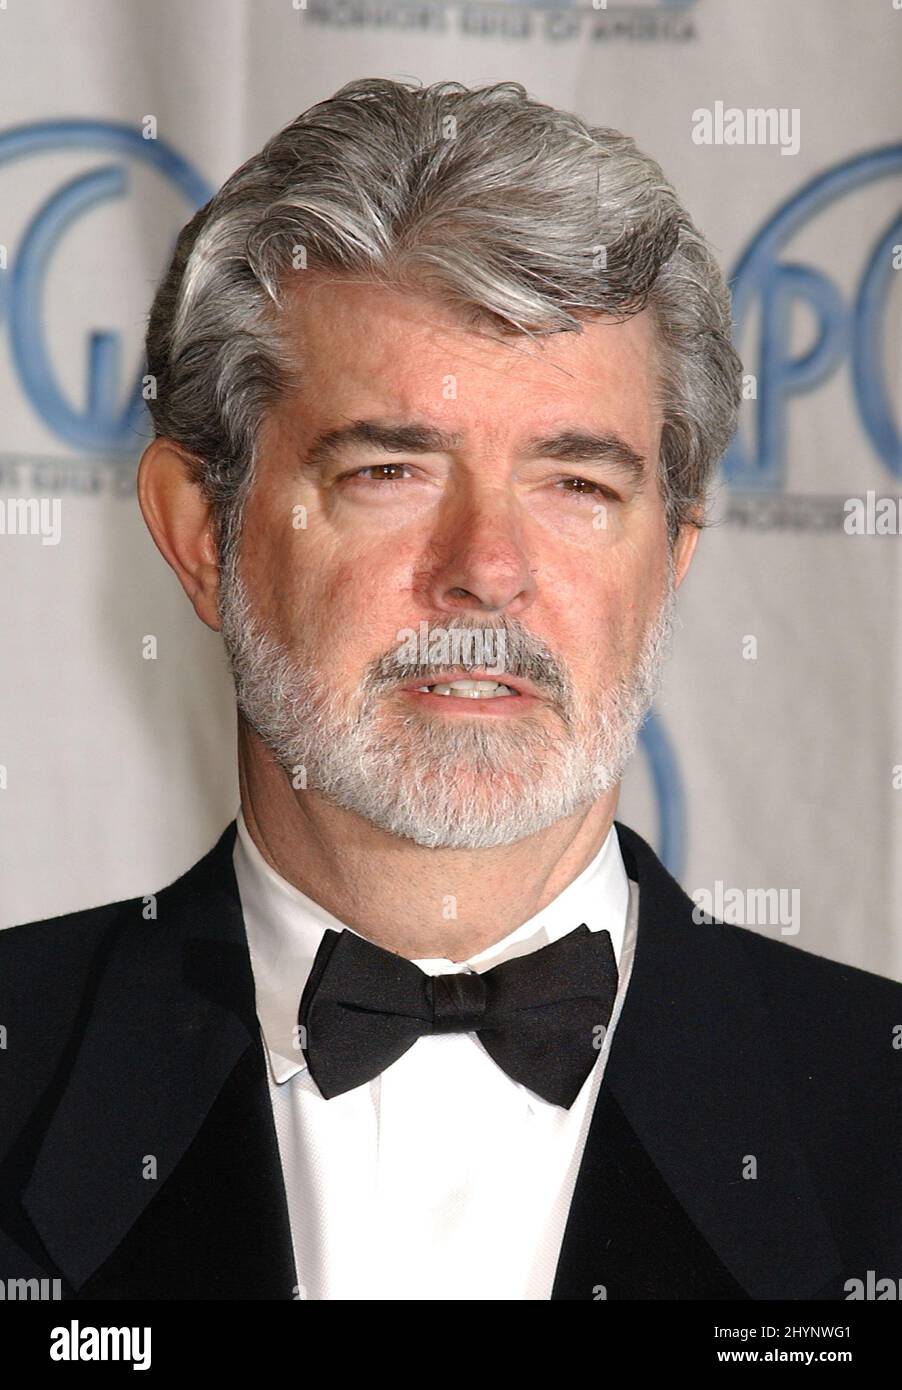 GEORGE LUCAS ATTENDS THE PRODUCER'S GUILD AWARDS 2003 HELD AT THE CENTURY PLAZA HOTEL, CALIFORNIA. PICTURE: UK PRESS Stock Photo